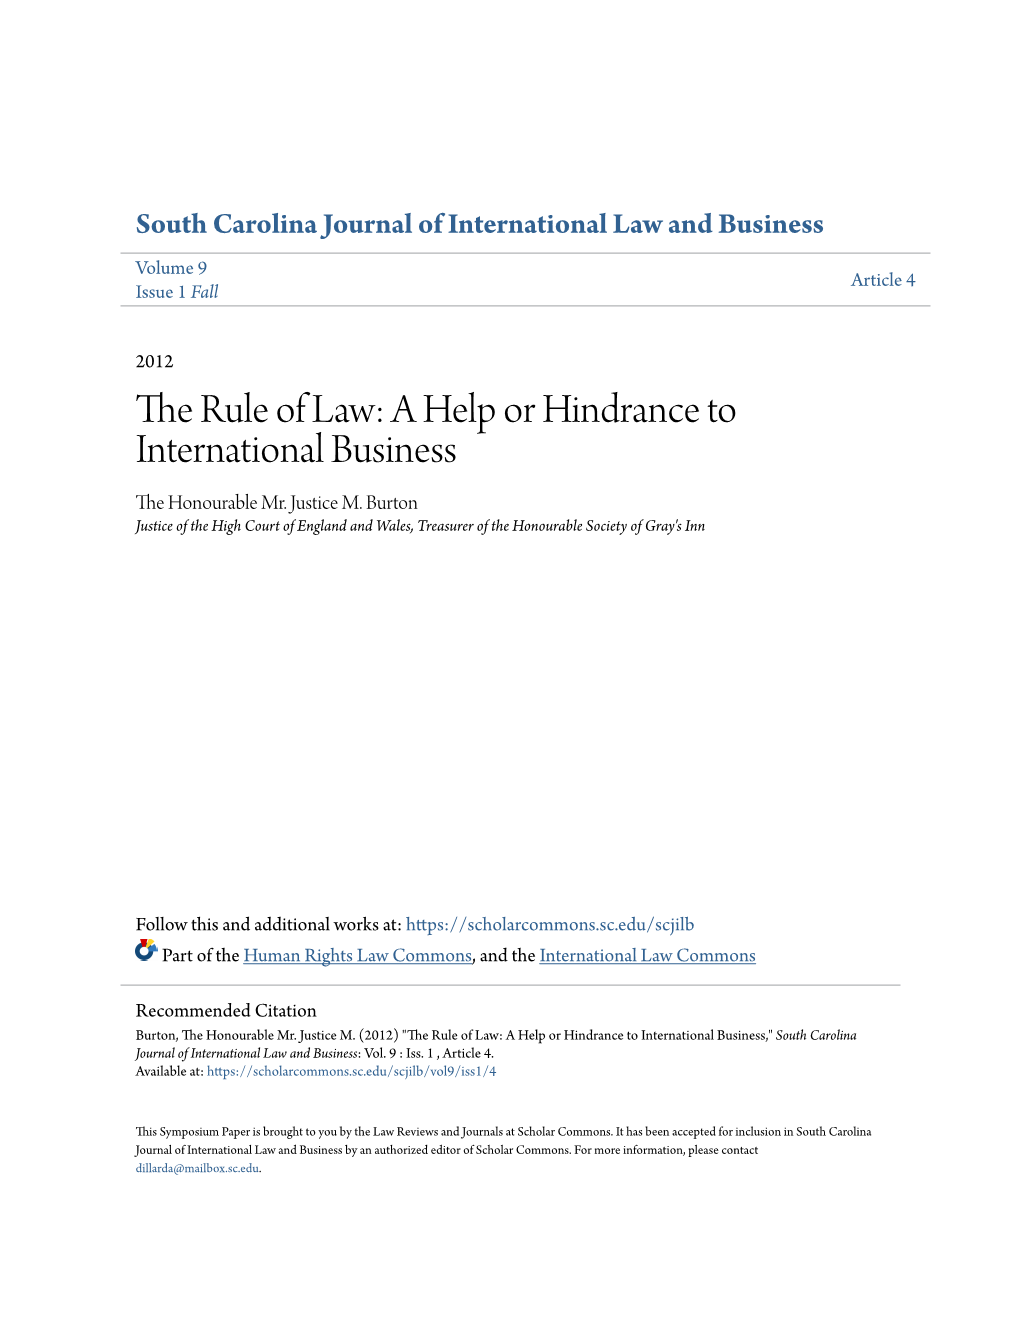 The Rule of Law: a Help Or Hindrance to International Business the Onourh Able Mr